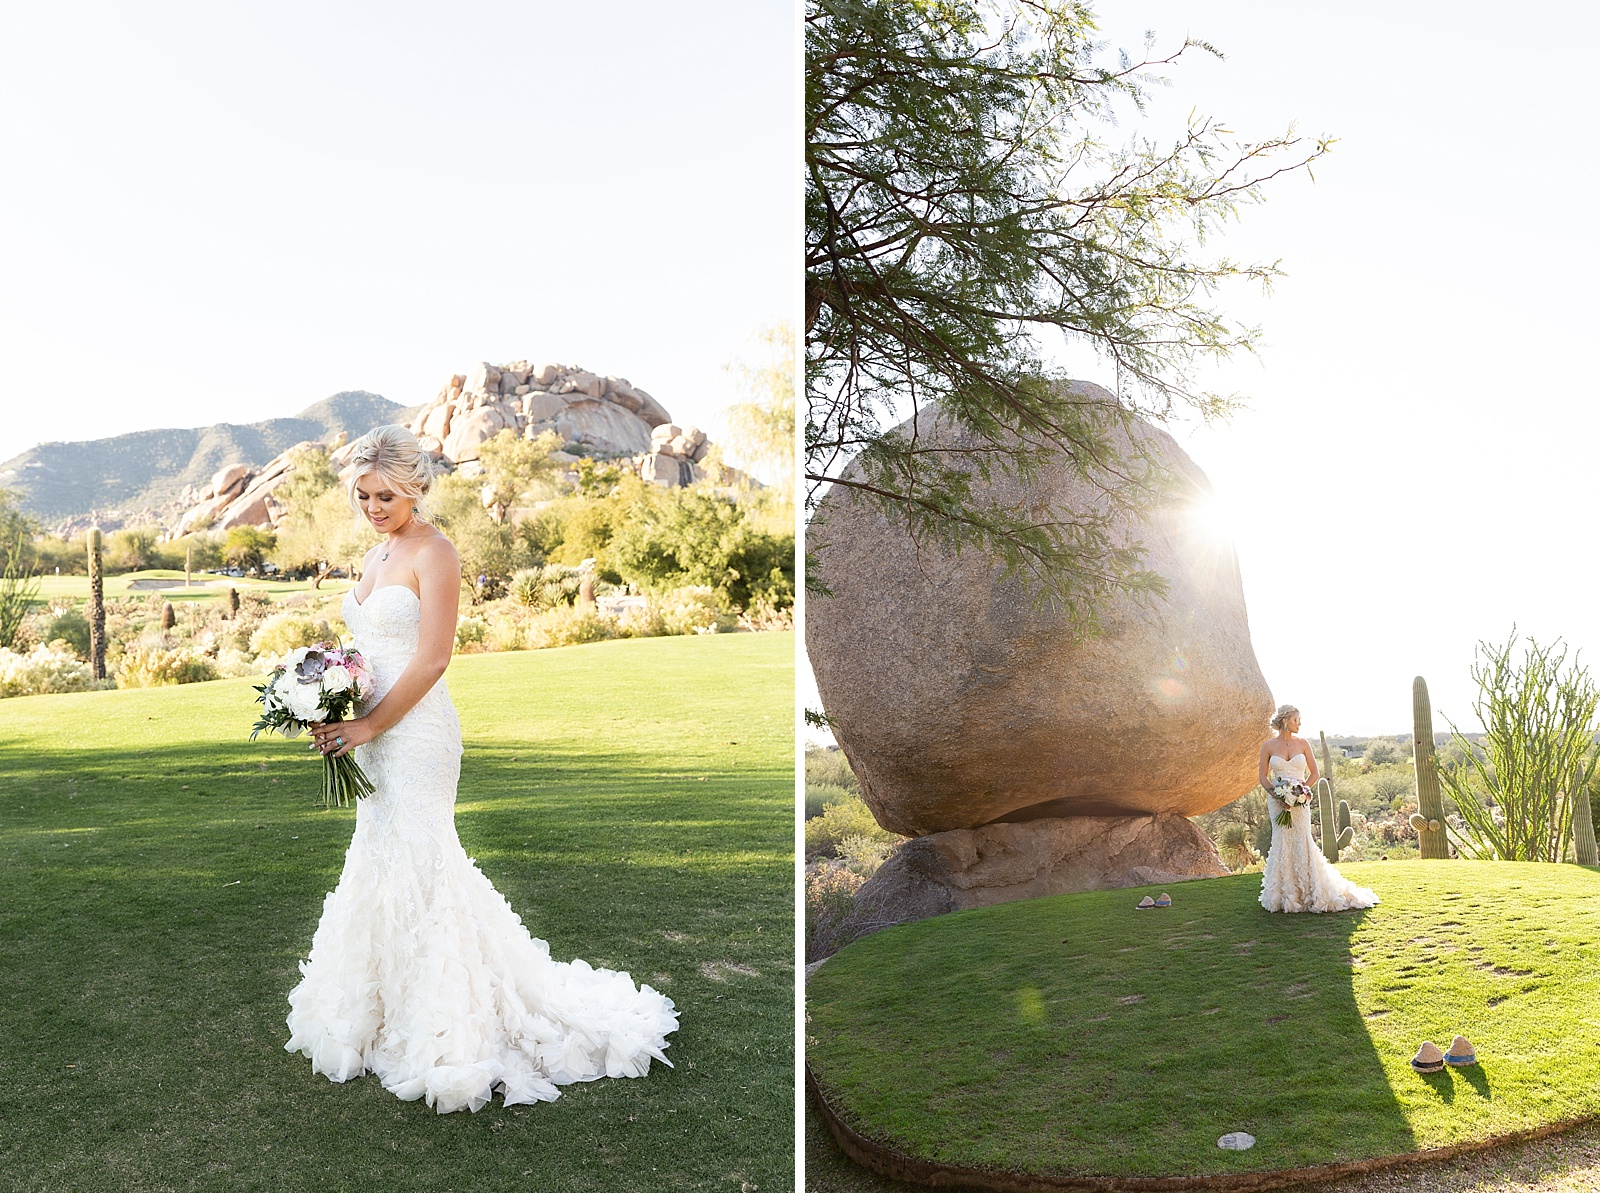 Wedding portraits at The Boulders Resort and Spa photographed by AZ photographer Randi Michelle Photography